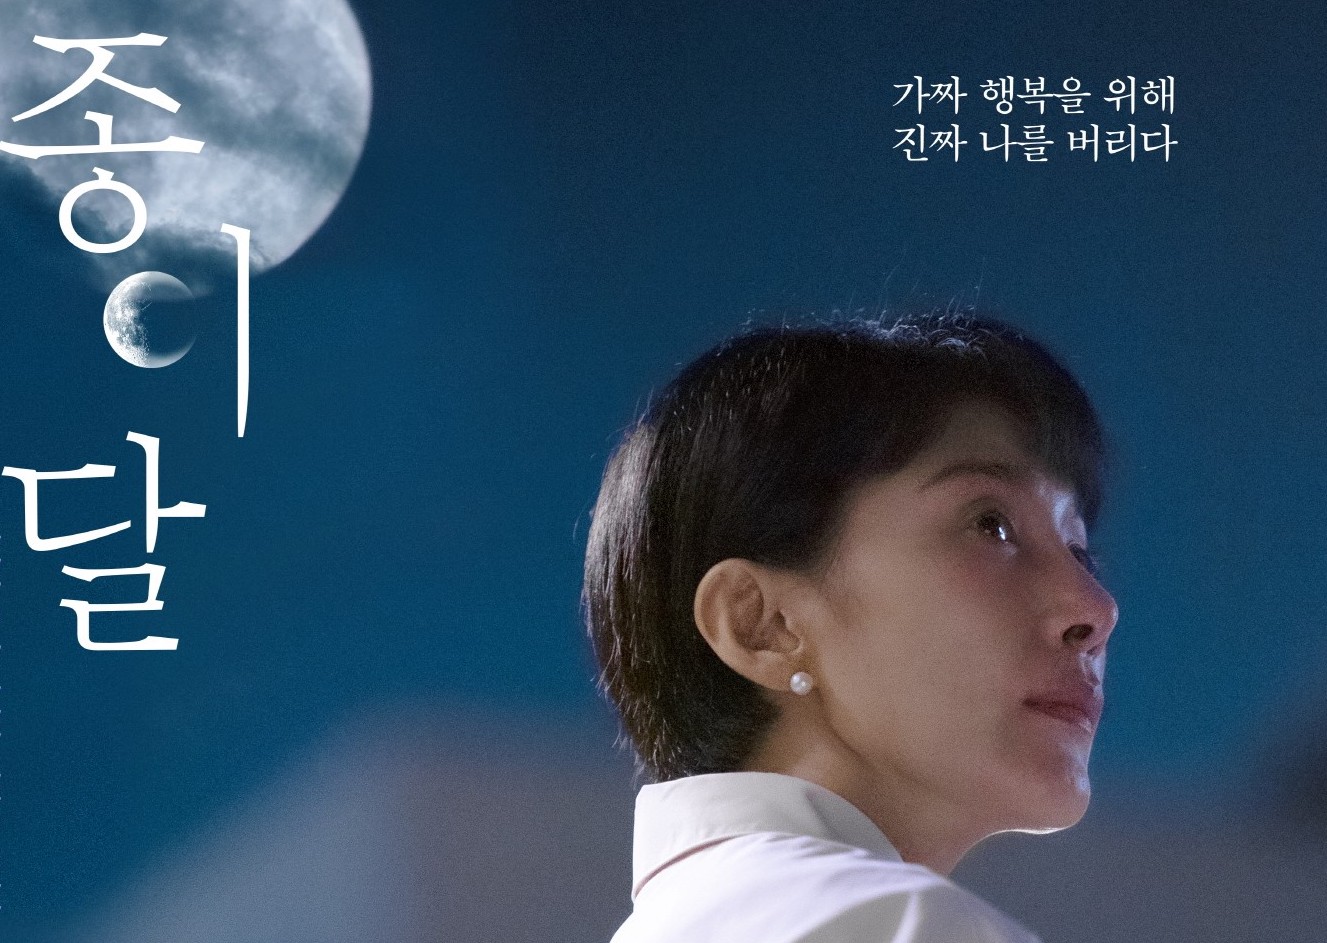 Kim Seo-hyung stands at a crossroads in ENA’s Paper Moon